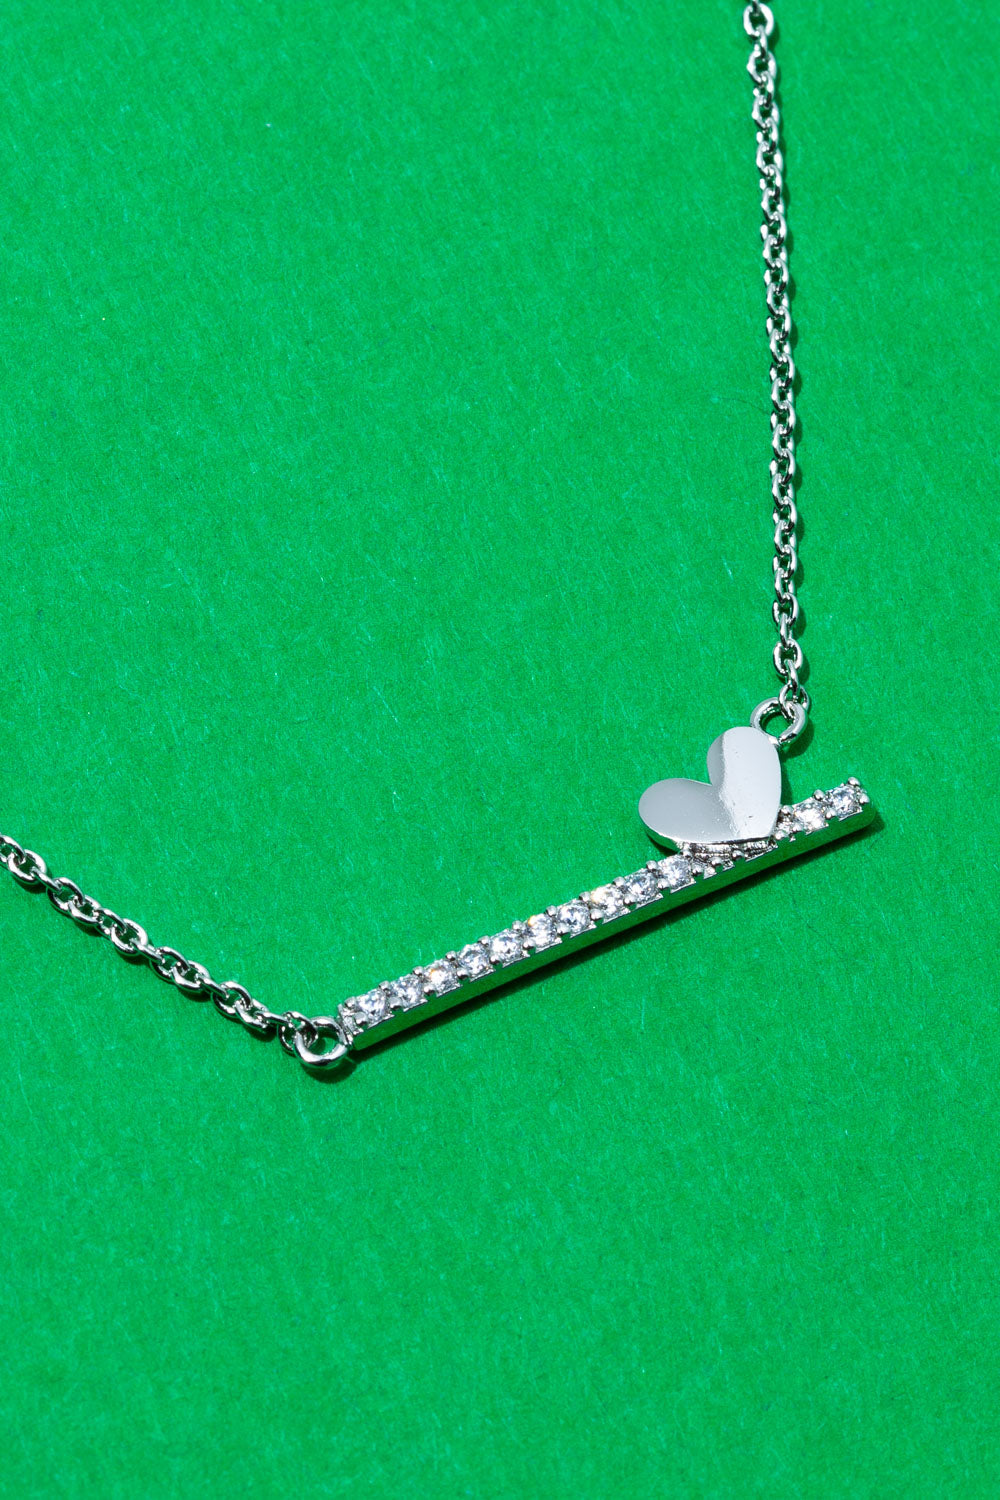 Type 4 Love On the Line Necklace